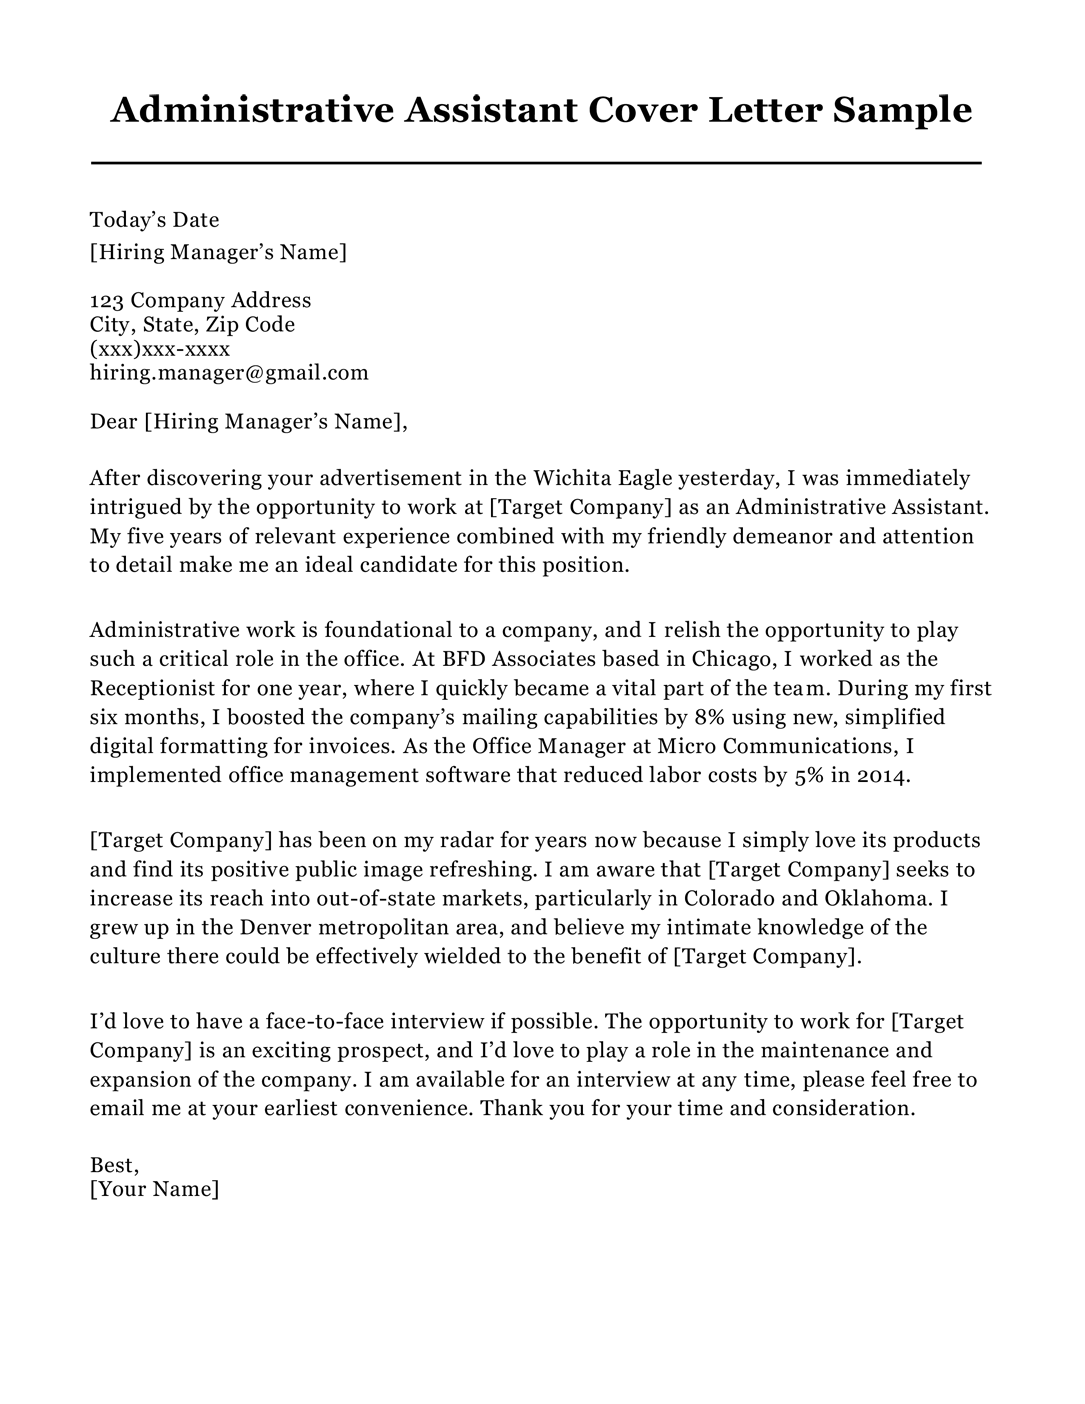 Admin Cover Letter Template from resumecompanion.com